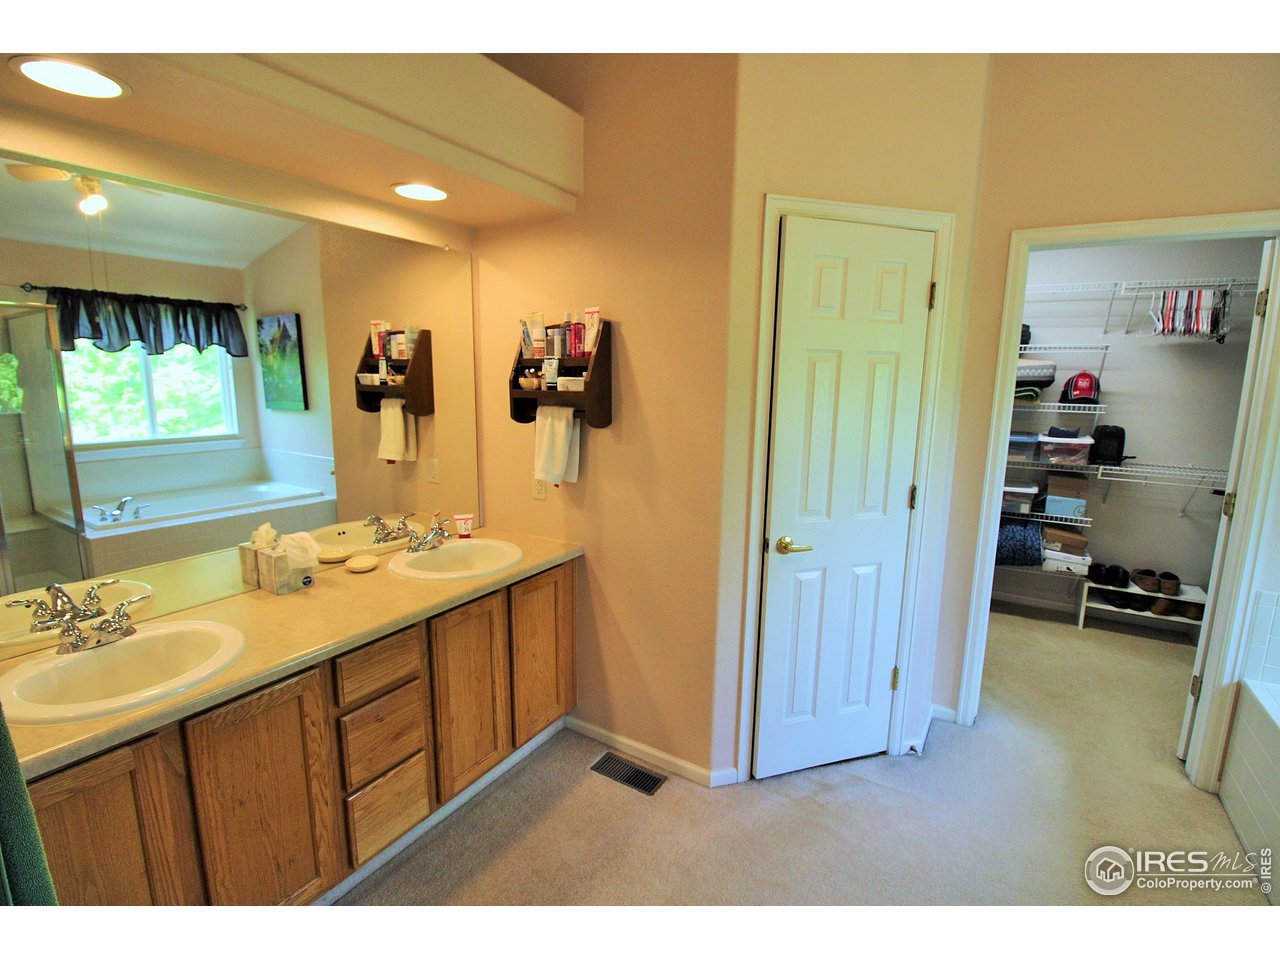 Private master bath with double vanity and big walk-in closet.